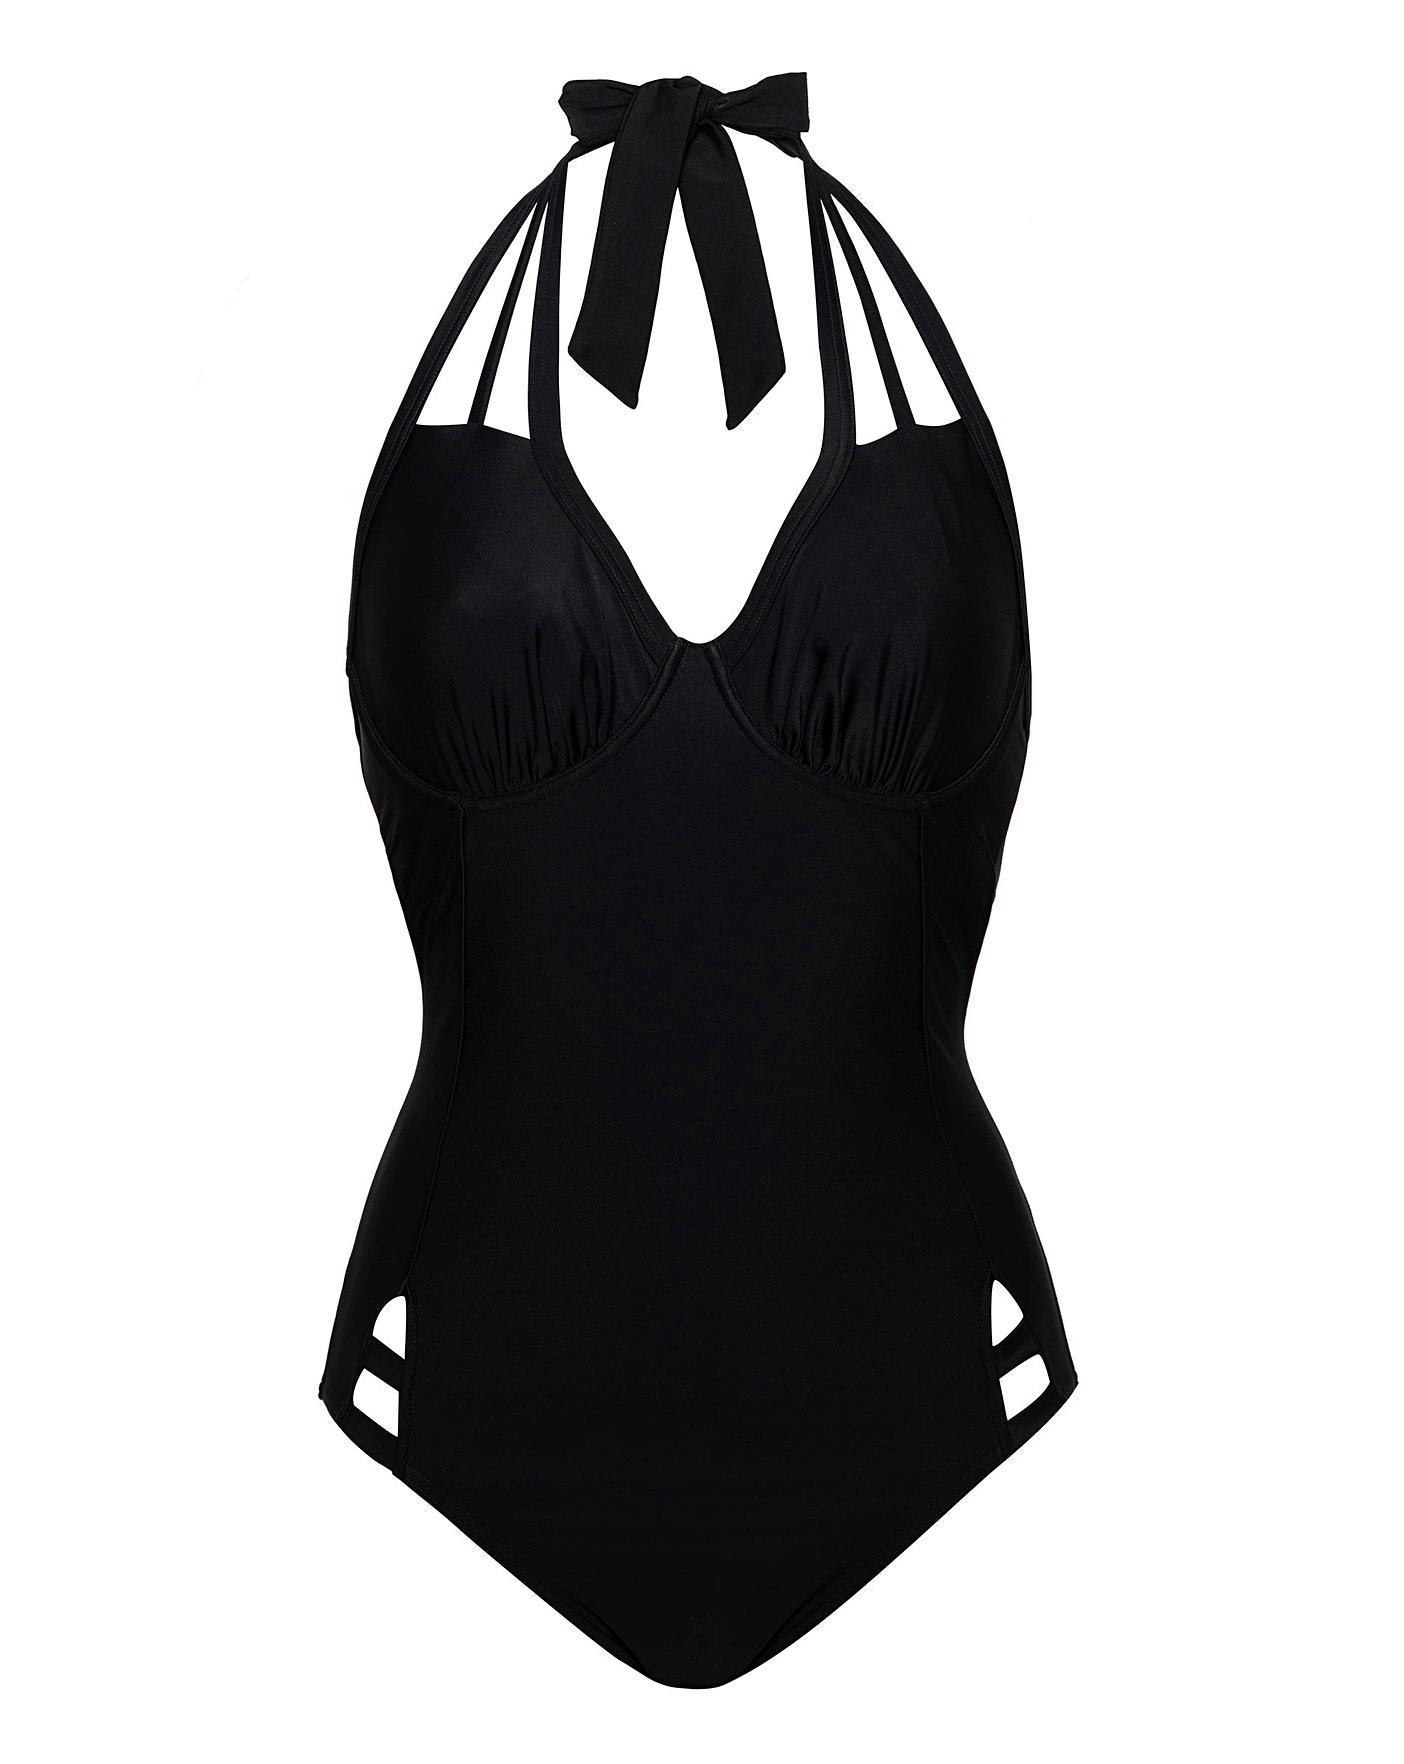 Figleaves womens one piece swimsuit. Neck and halter style. Underwire 38DD